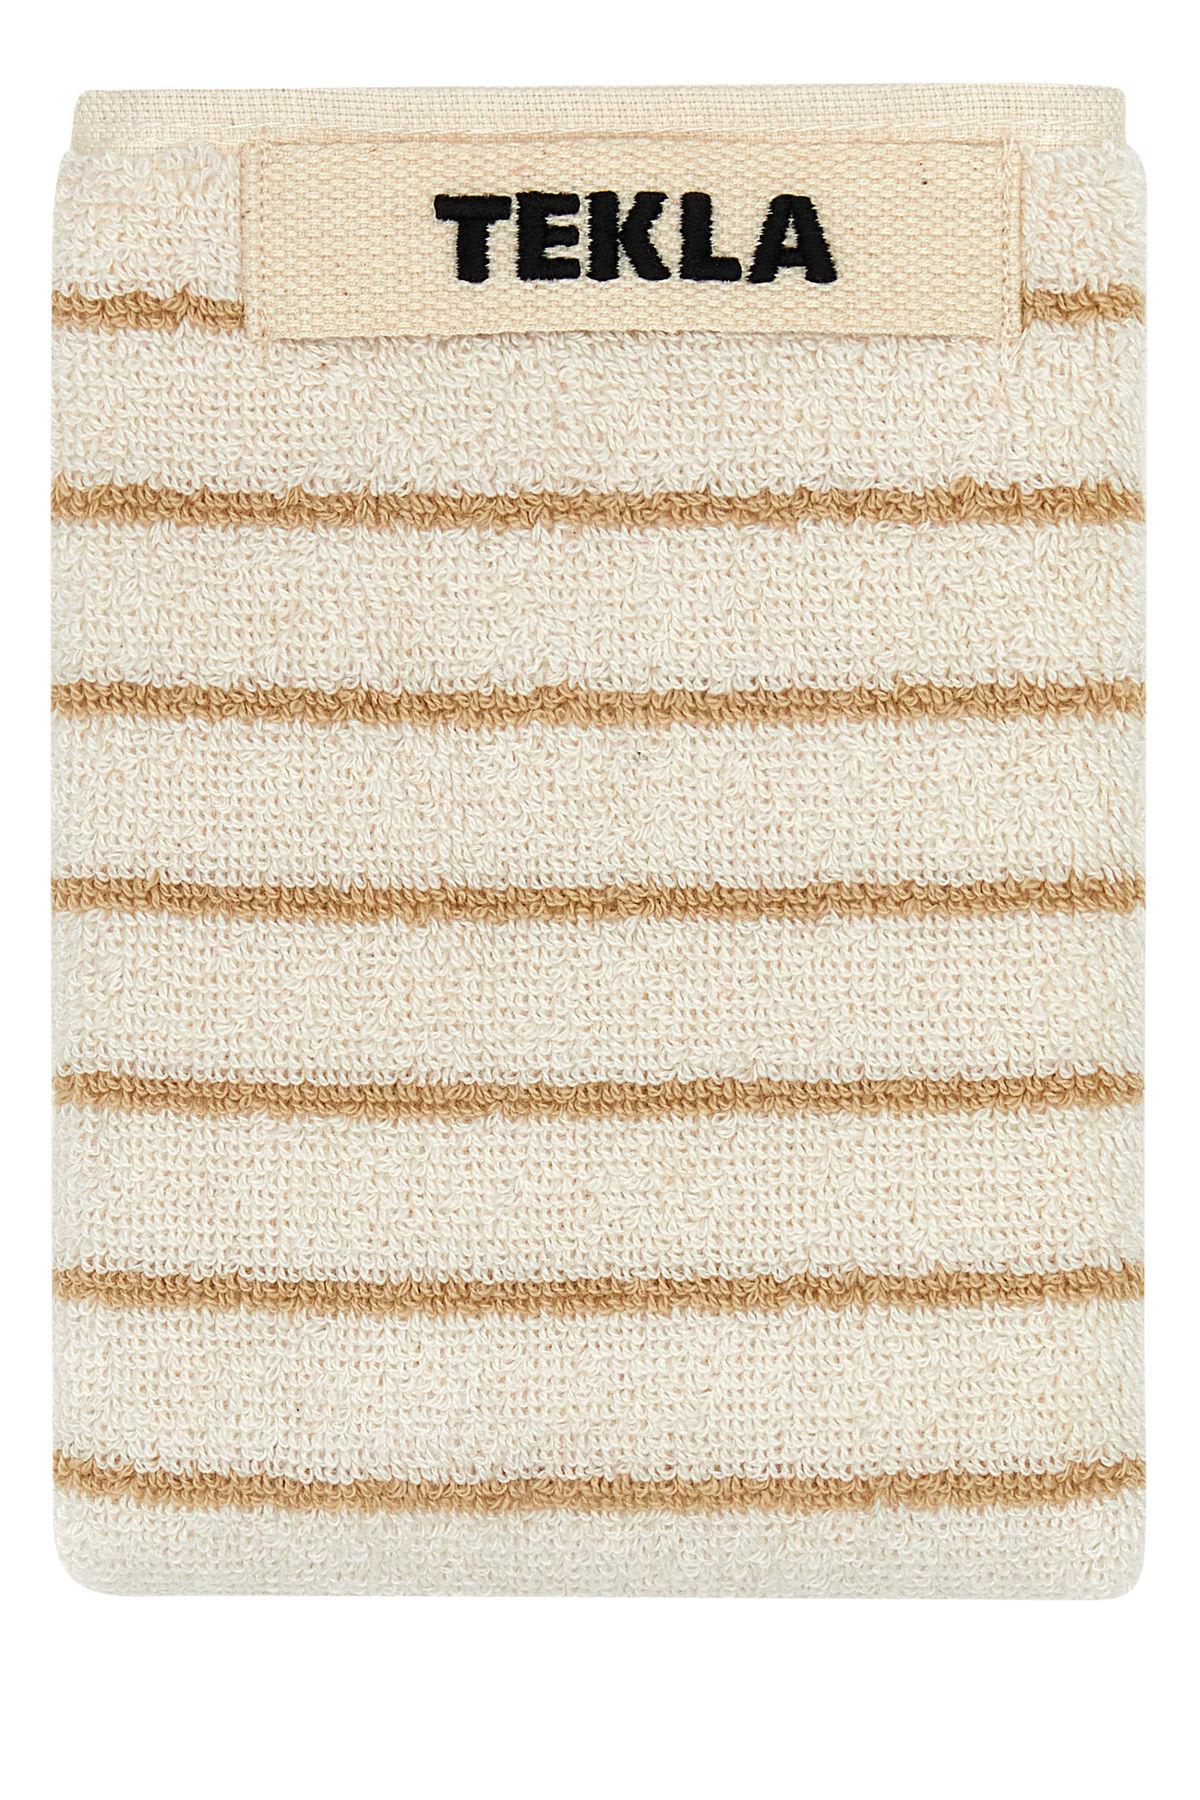 Tekla Embroidered Terry Towel In Orange